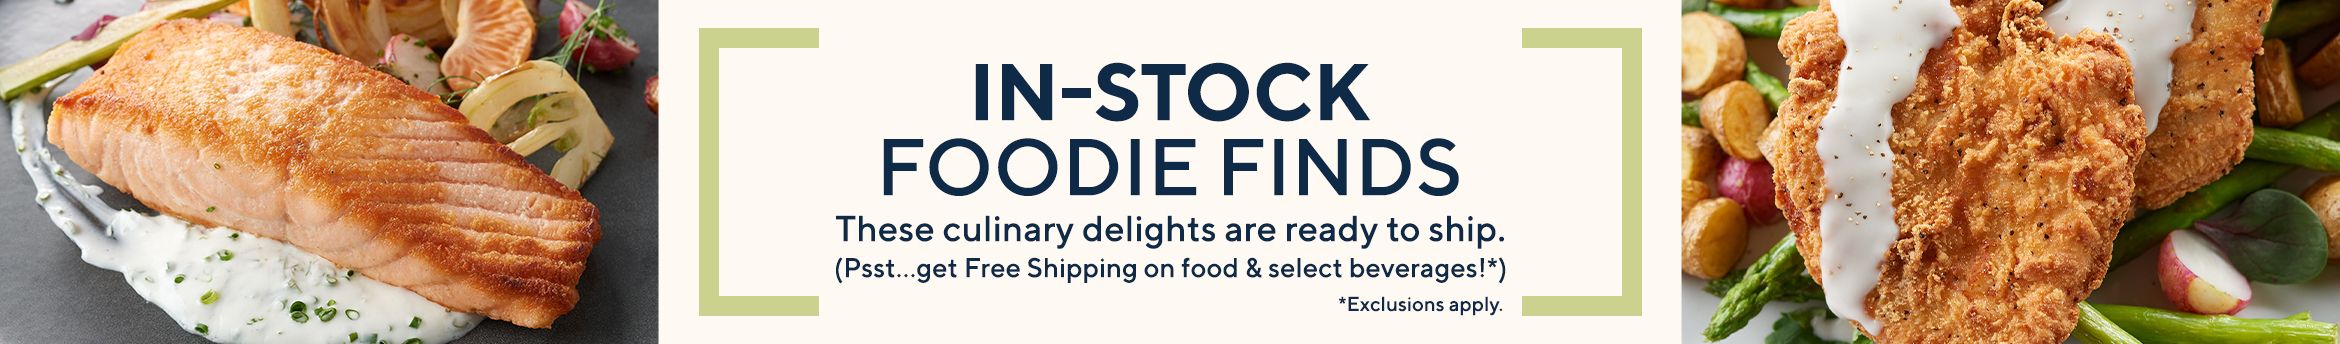 In-Stock Foodie Finds These culinary delights are ready to ship. (Psst…get Free Shipping on food & select beverages!*)  Exclusions apply.